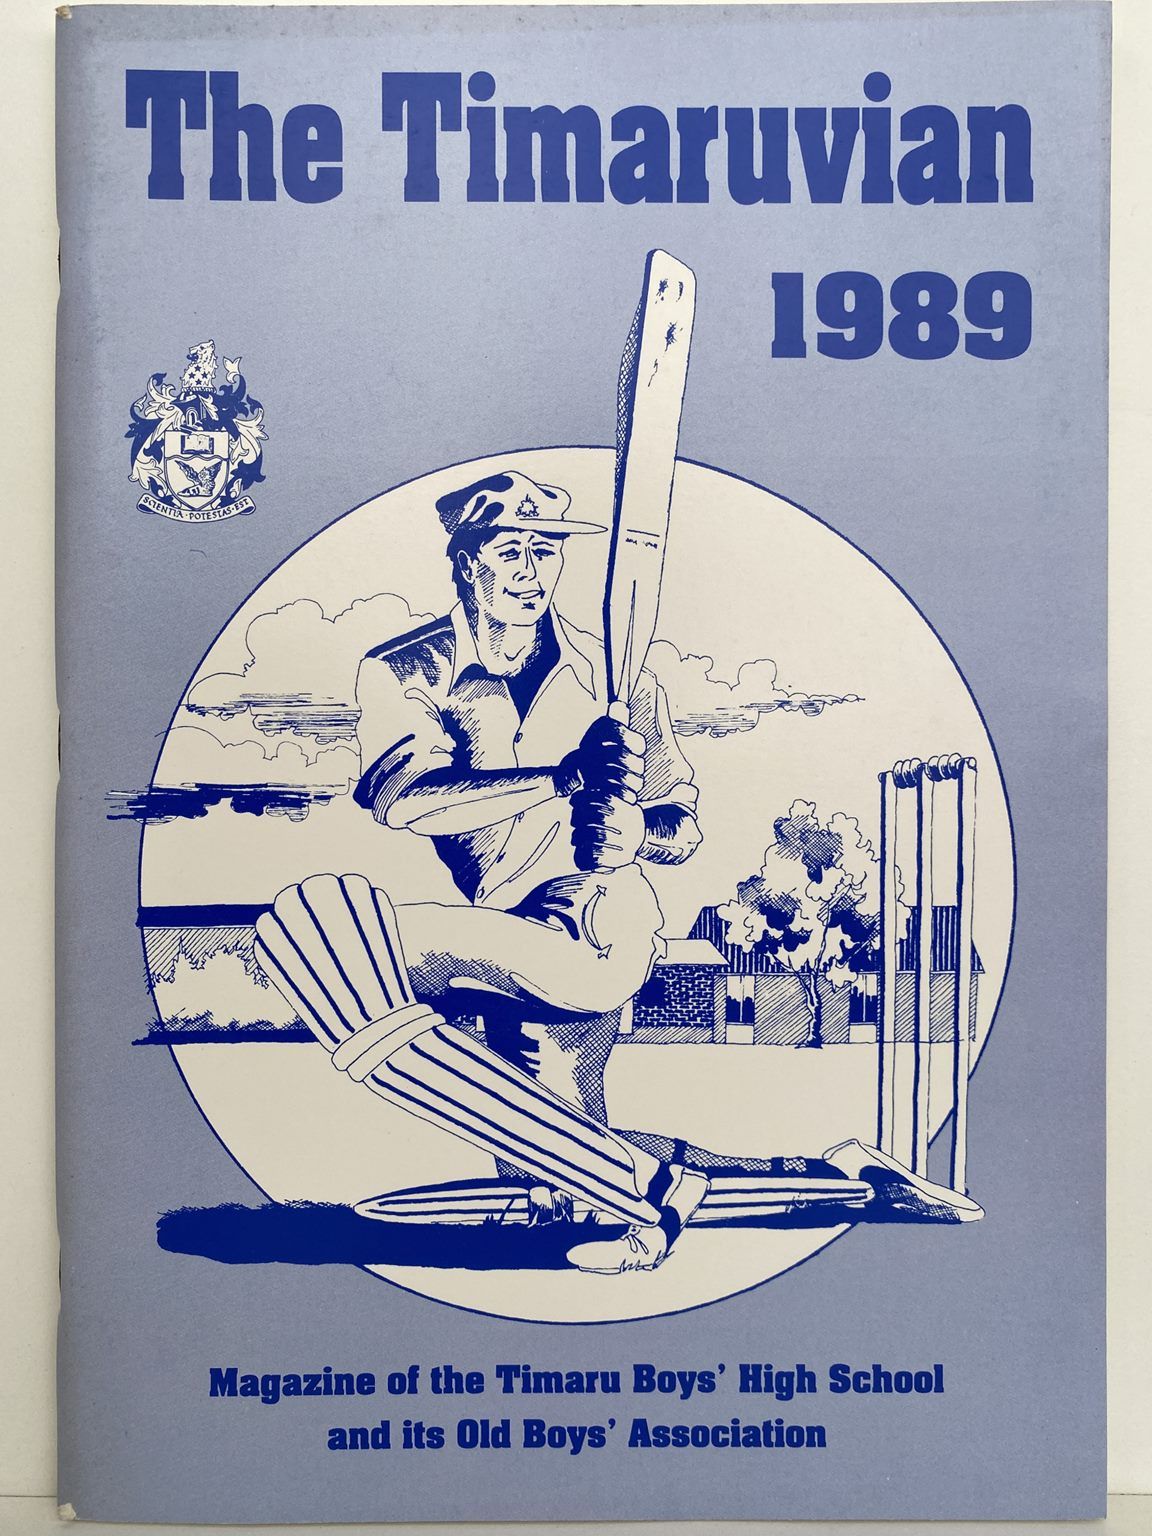 THE TIMARUVIAN: Magazine of the Timaru Boys' High School and its Old Boys' Association 1989